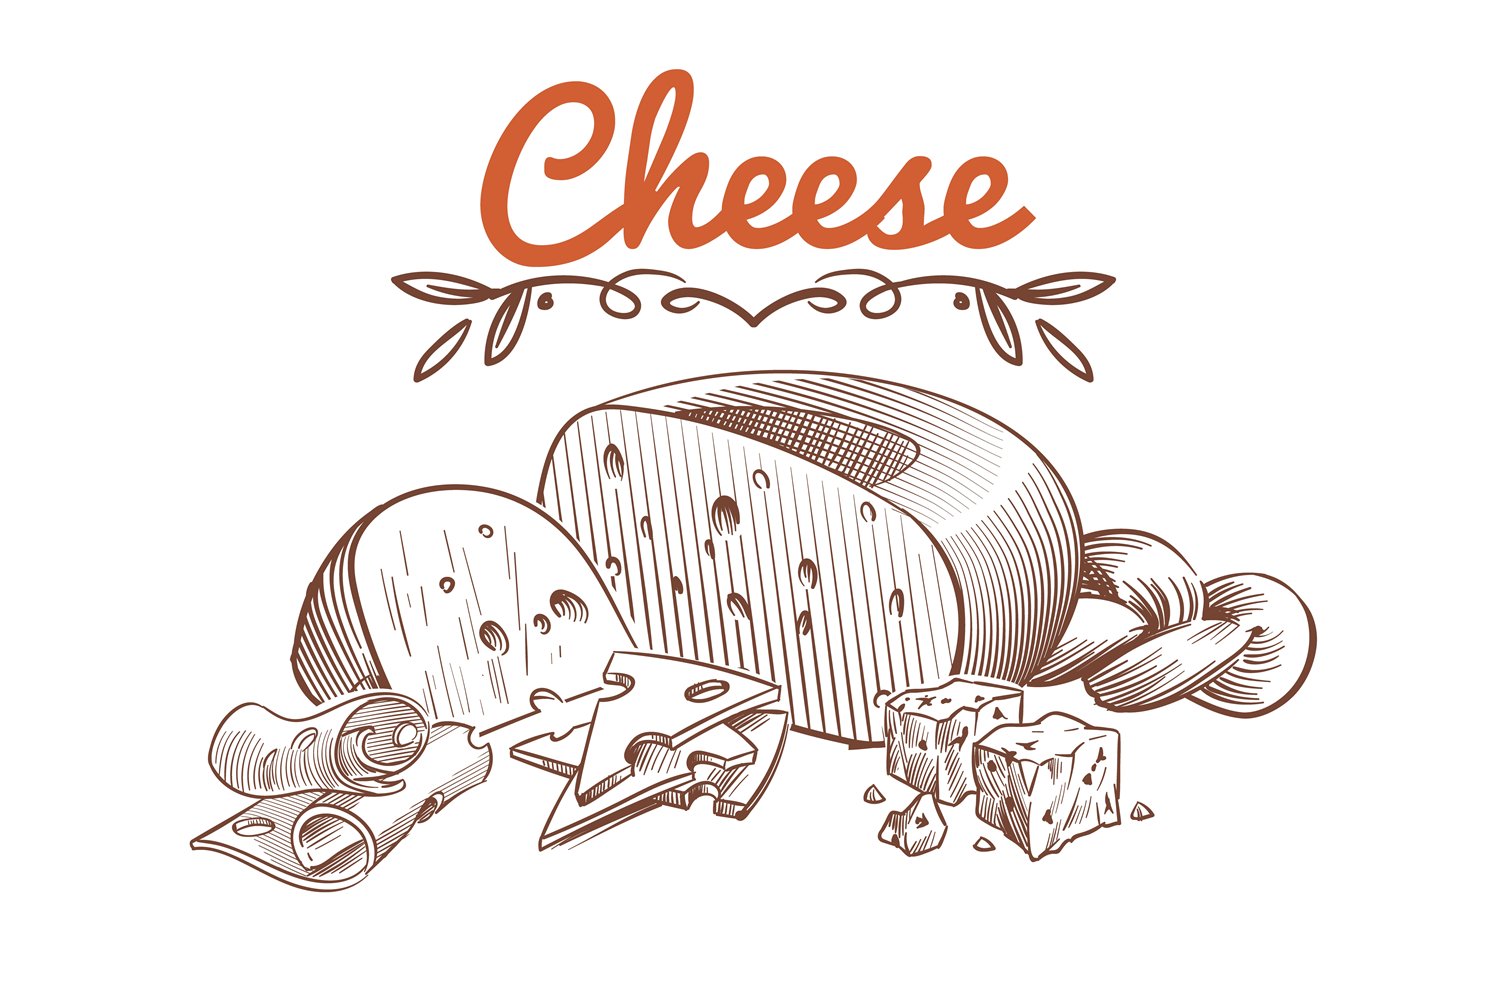 Memorable sketch of swiss cheese with a beautiful inscription.